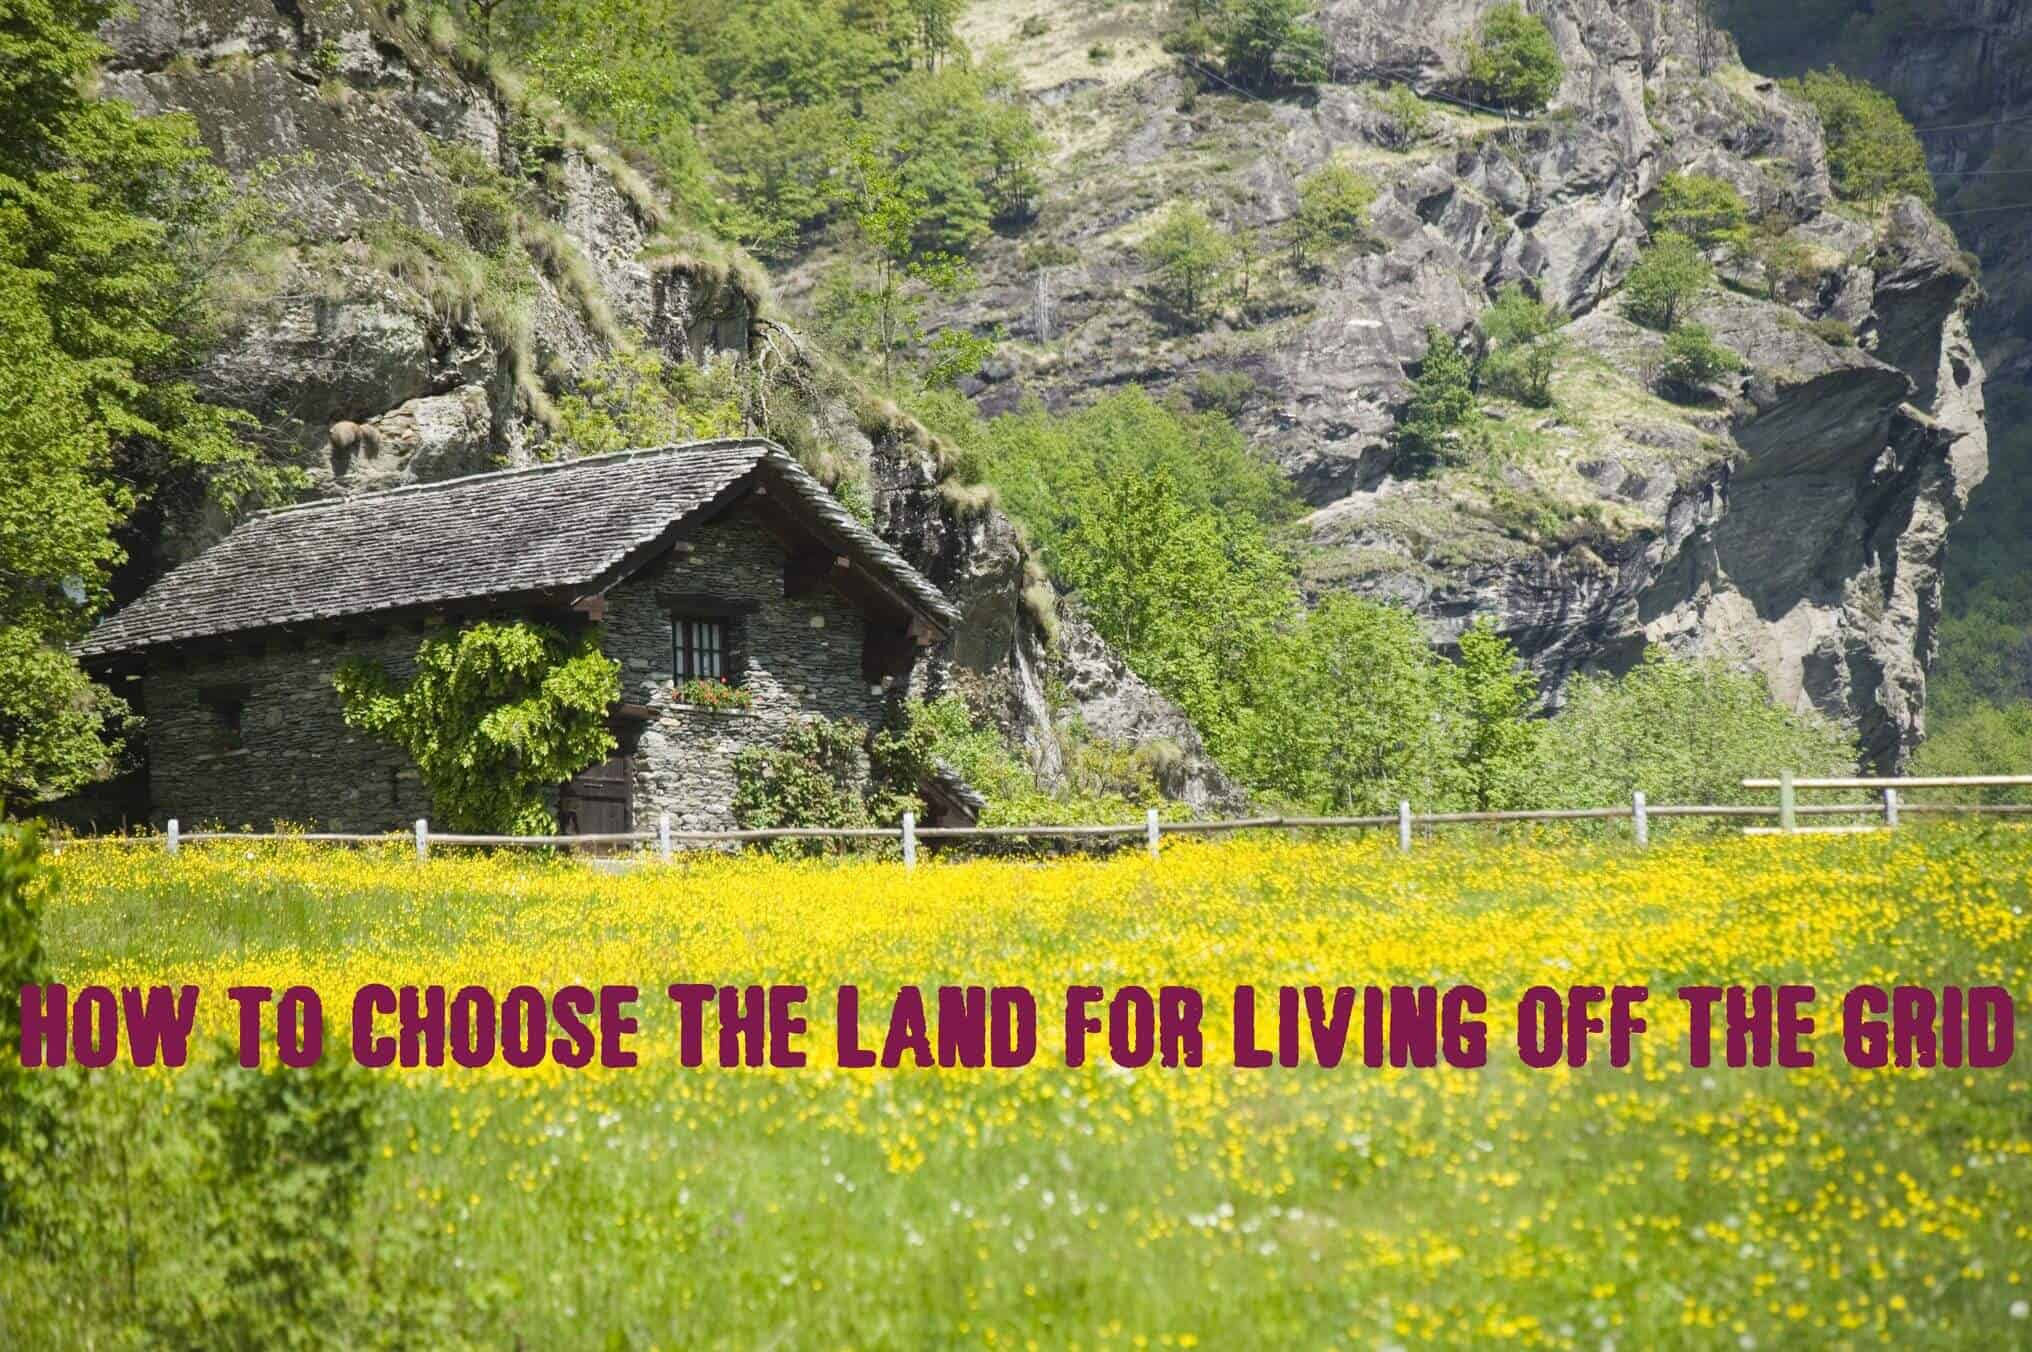 Choosing land for an Off-grid or Bug Out Location